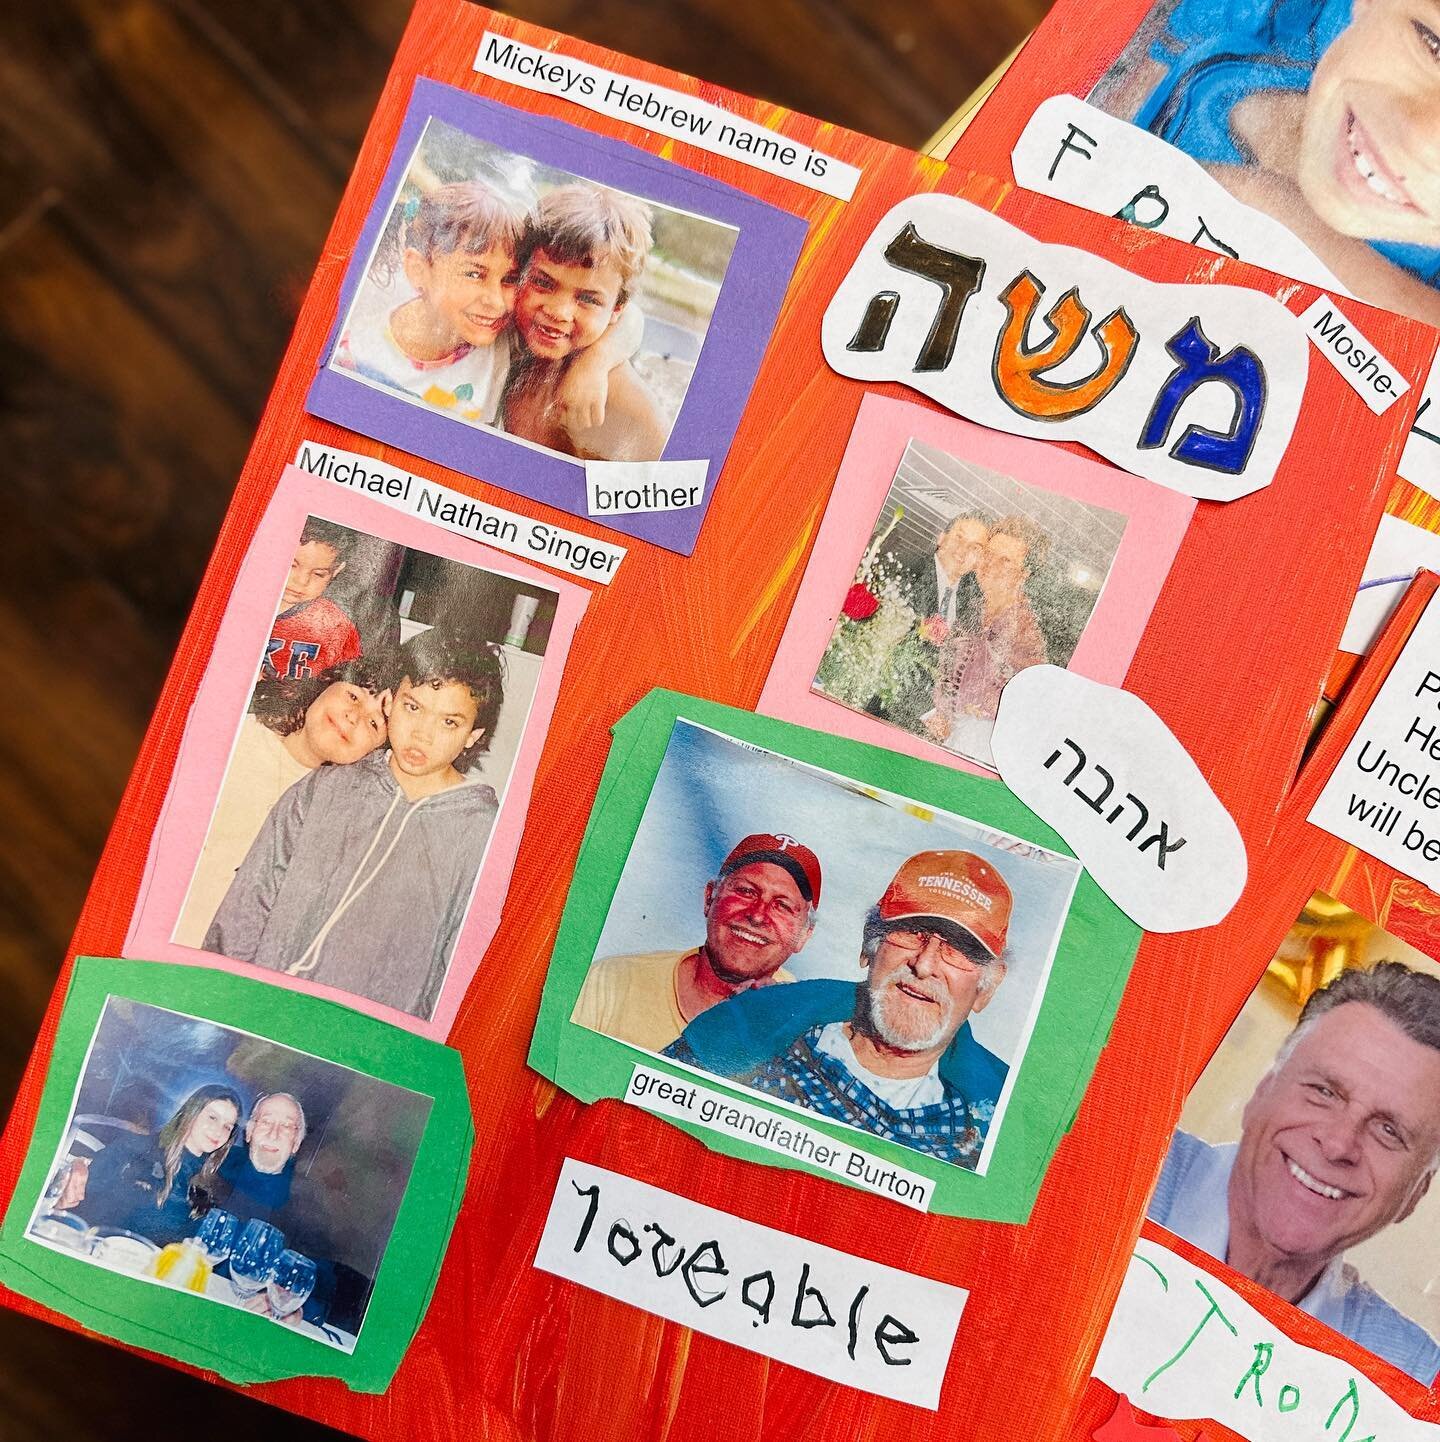 Each year our Kitah Daled children embark on a beautiful project learning about their Hebrew name, where it came from, and who they were named after. Each child had the opportunity to share their story about their unique name to their class.

Each pa